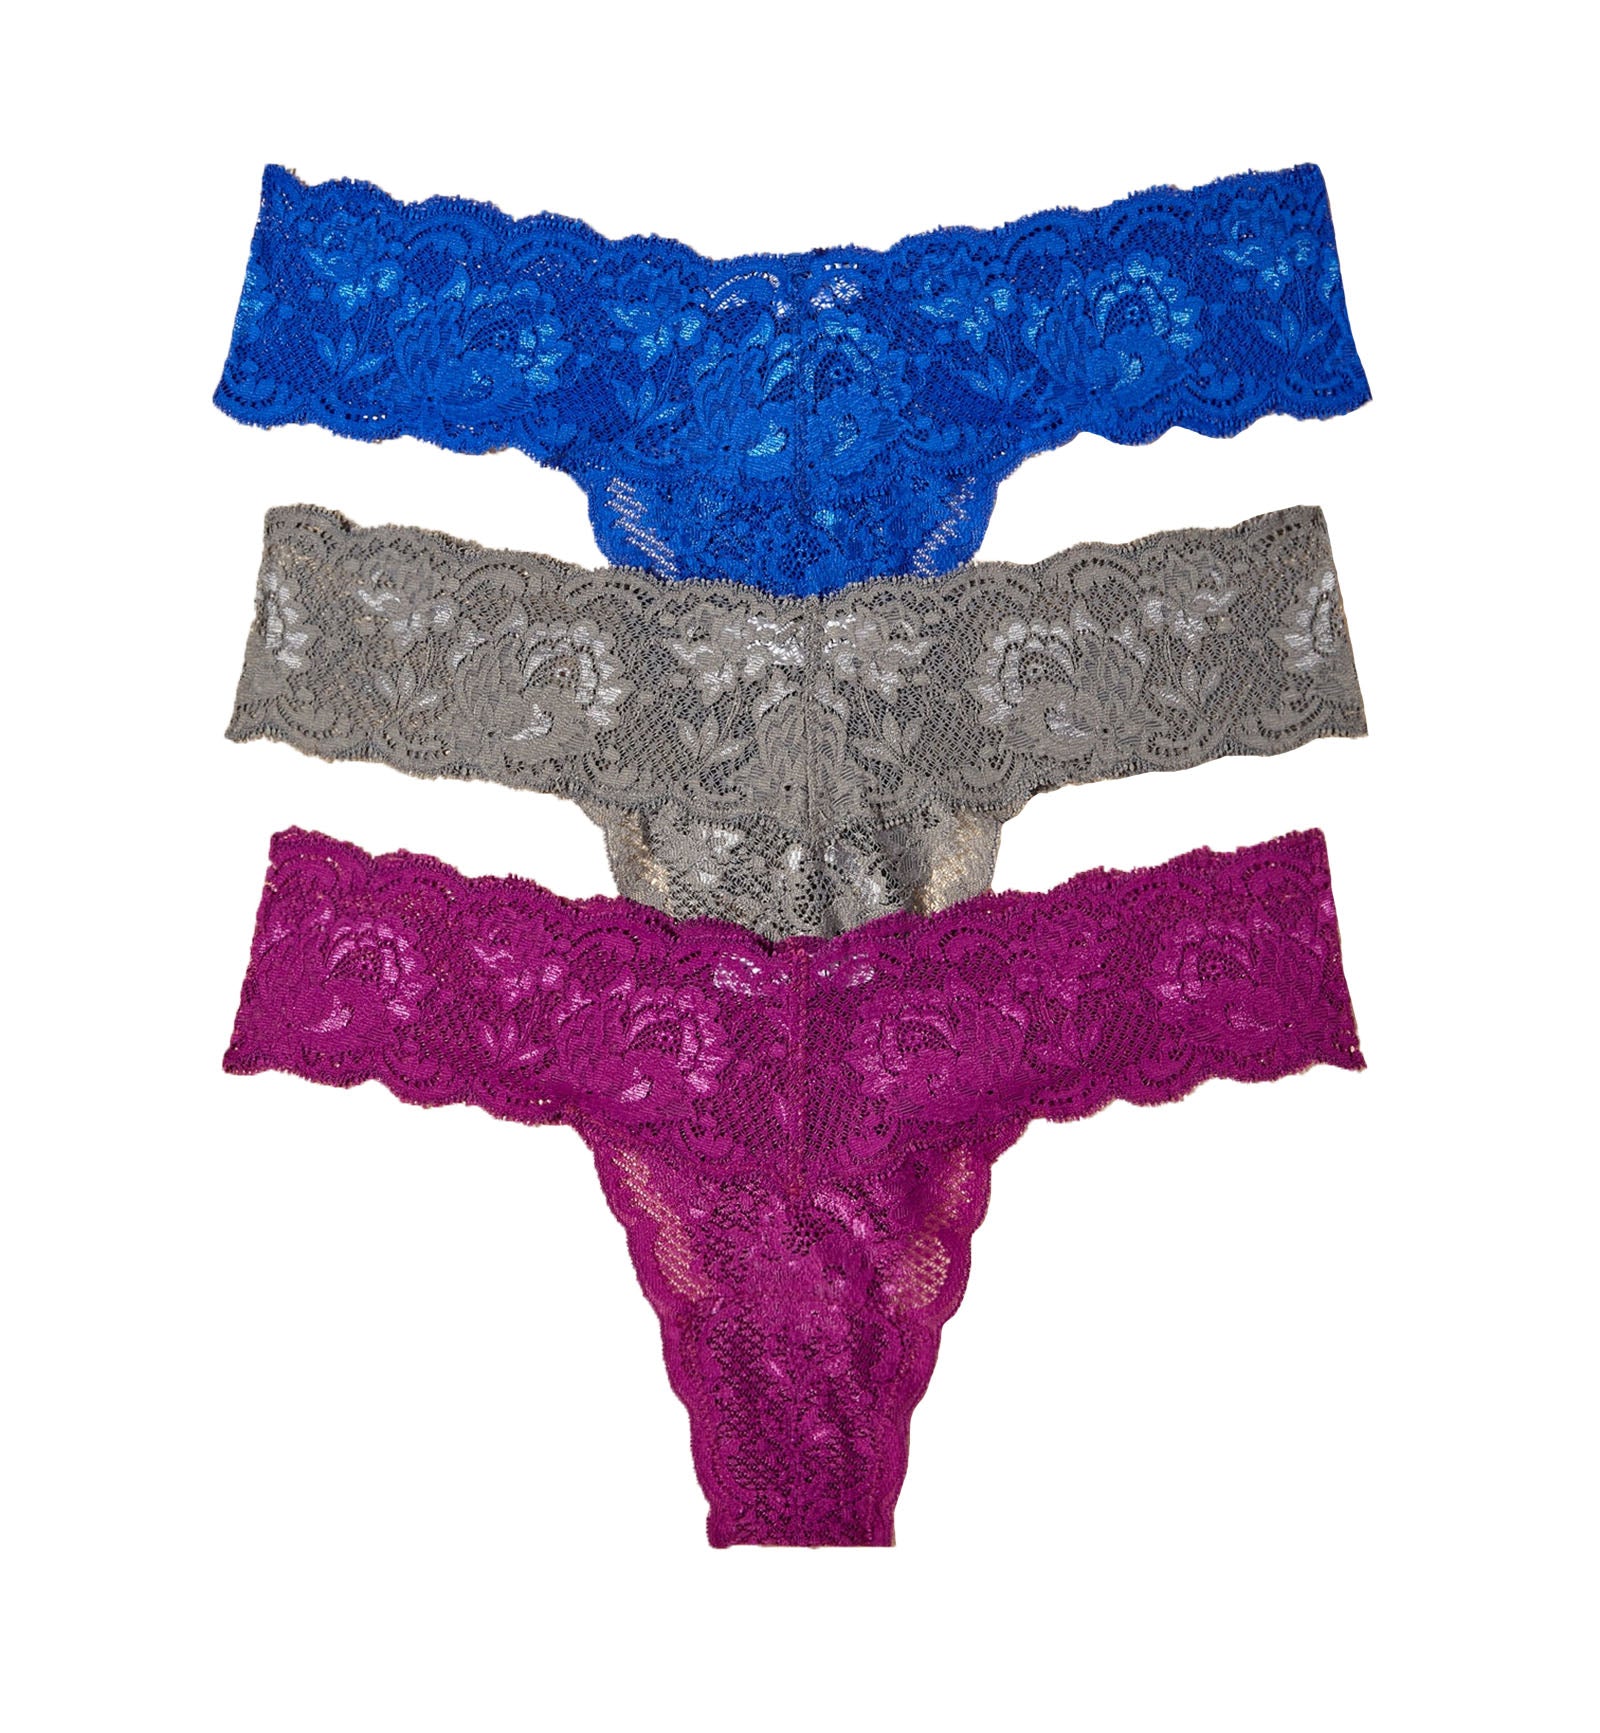 Cosabella NSN 3 PACK Cutie Low Rise Thongs (NSNPK0321),Platinum/Swiss Beet/Cobalt - Platinum/Swiss Beet/Cobalt,One Size